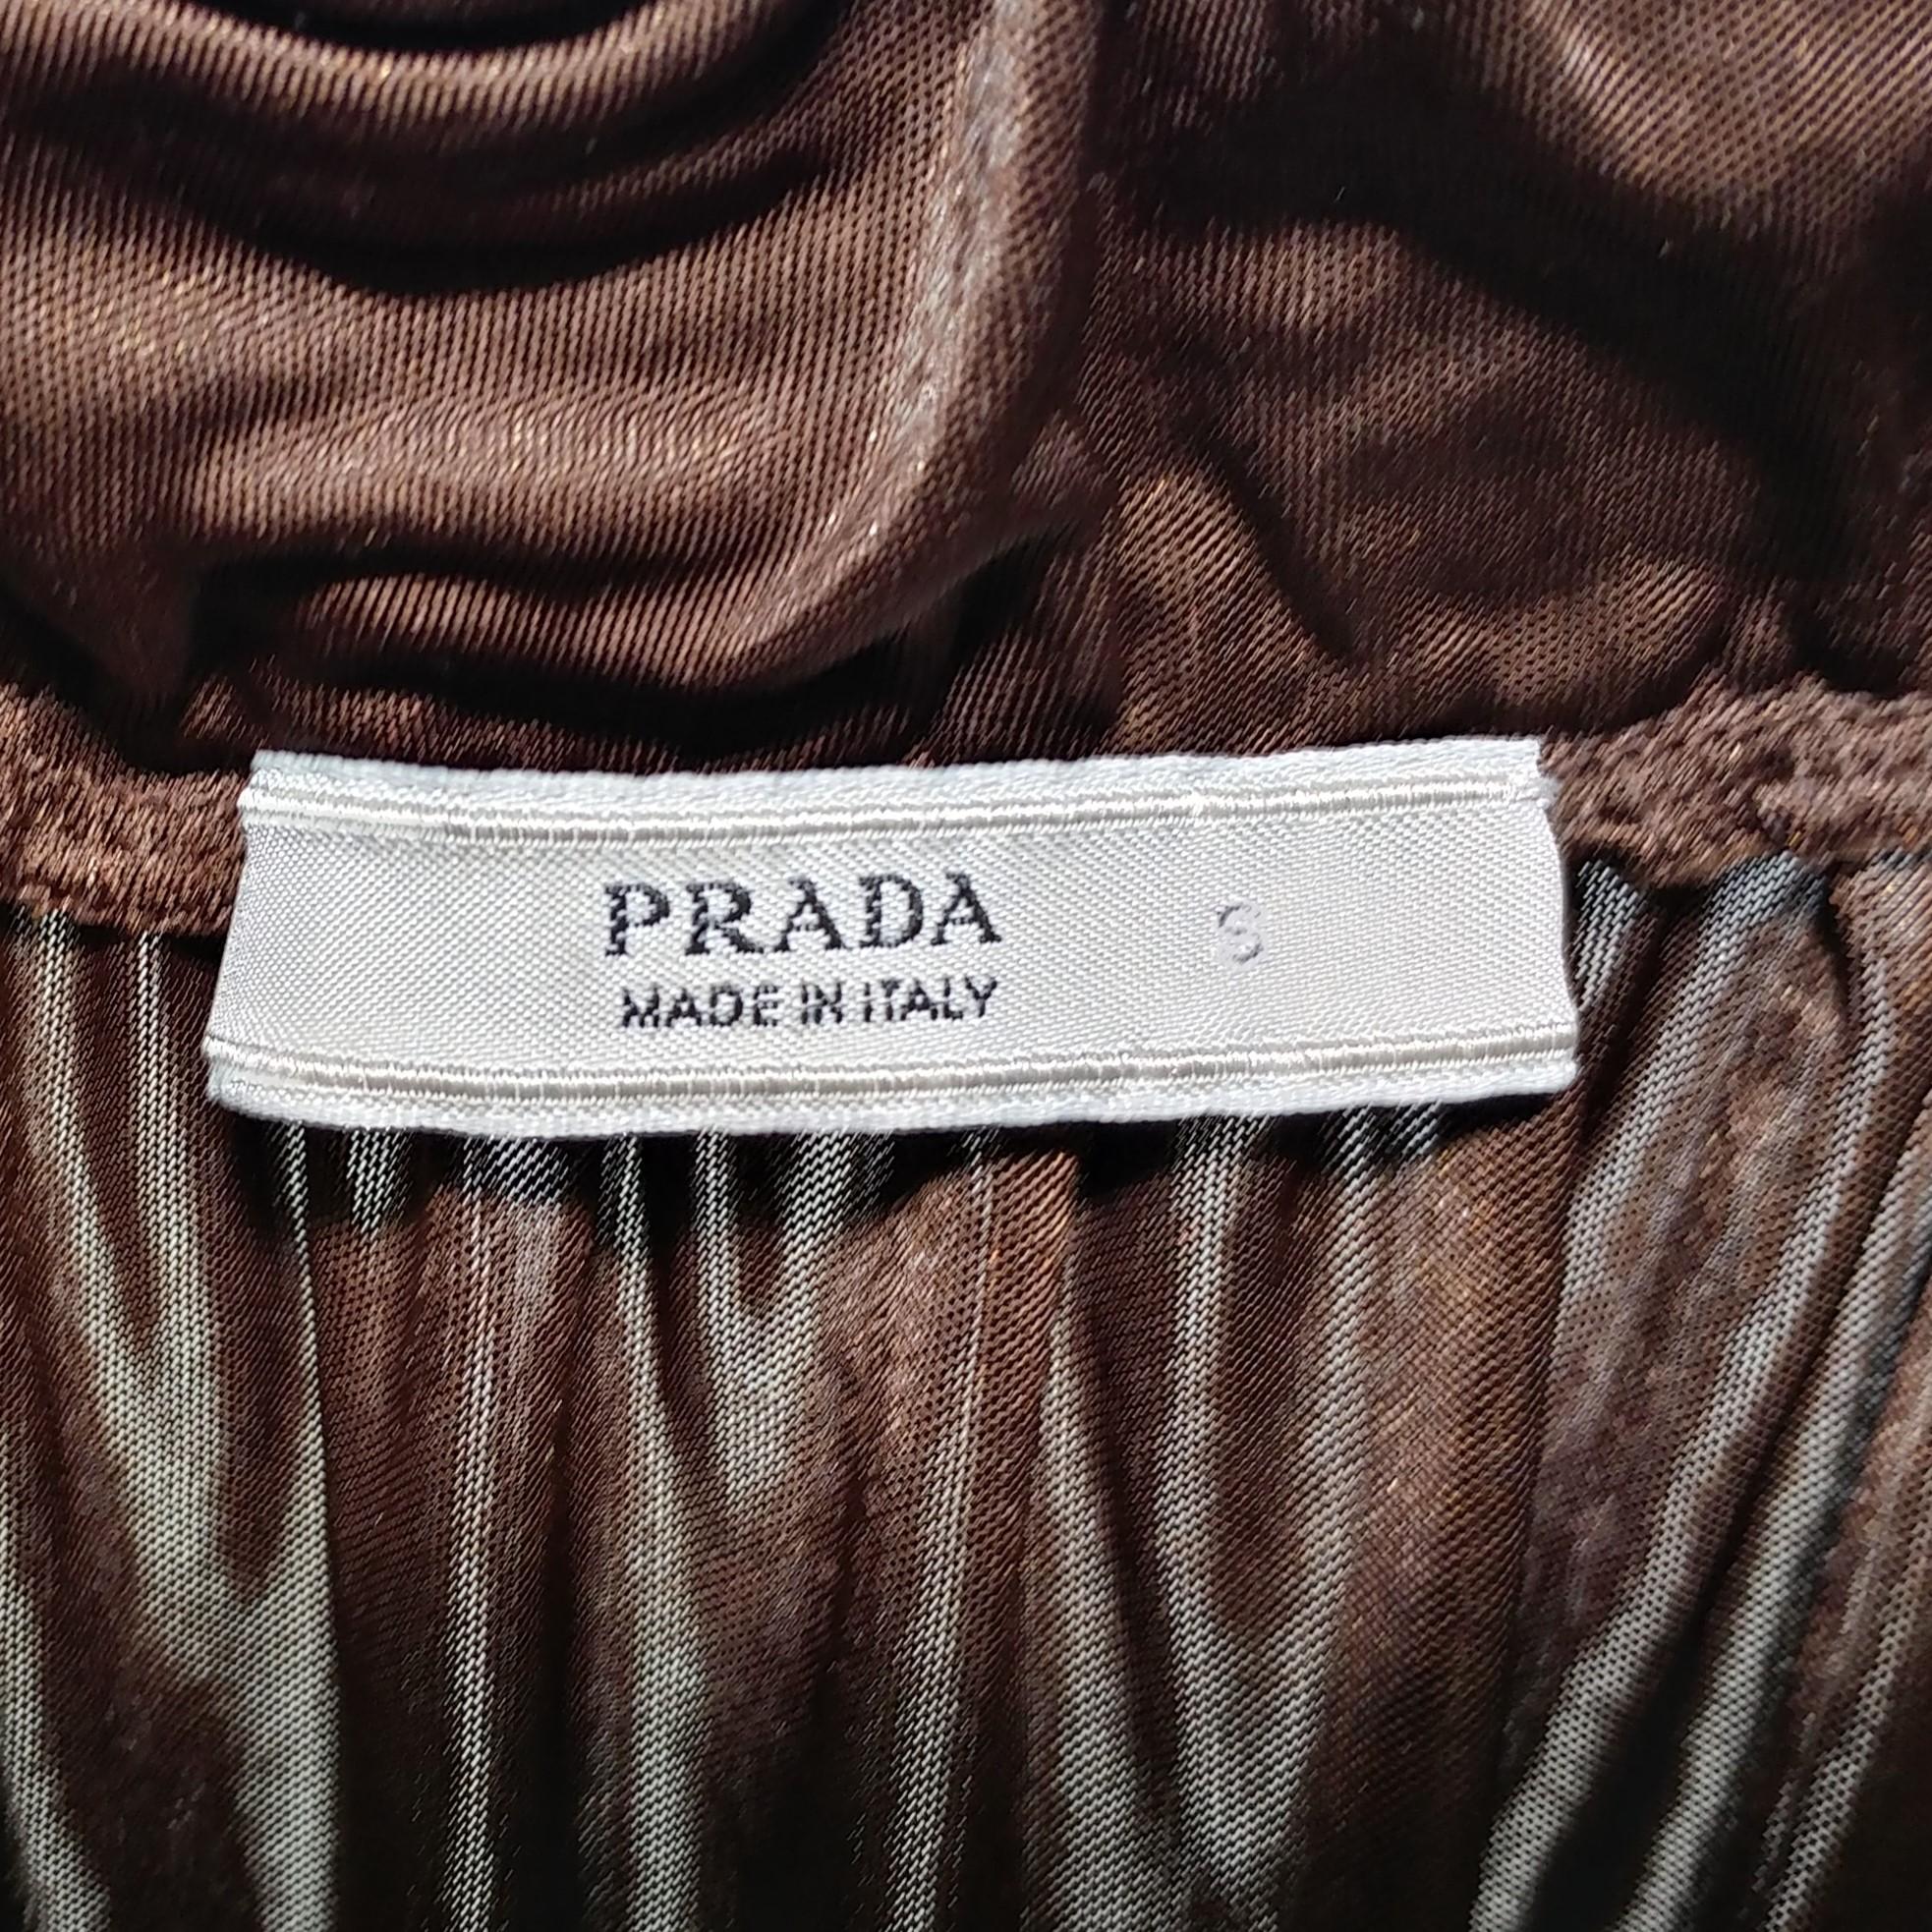 PRADA - Brown Tunic Tent Midi Dress with Three-Quarter Sleeves  Size S/M In Excellent Condition For Sale In Cuggiono, MI